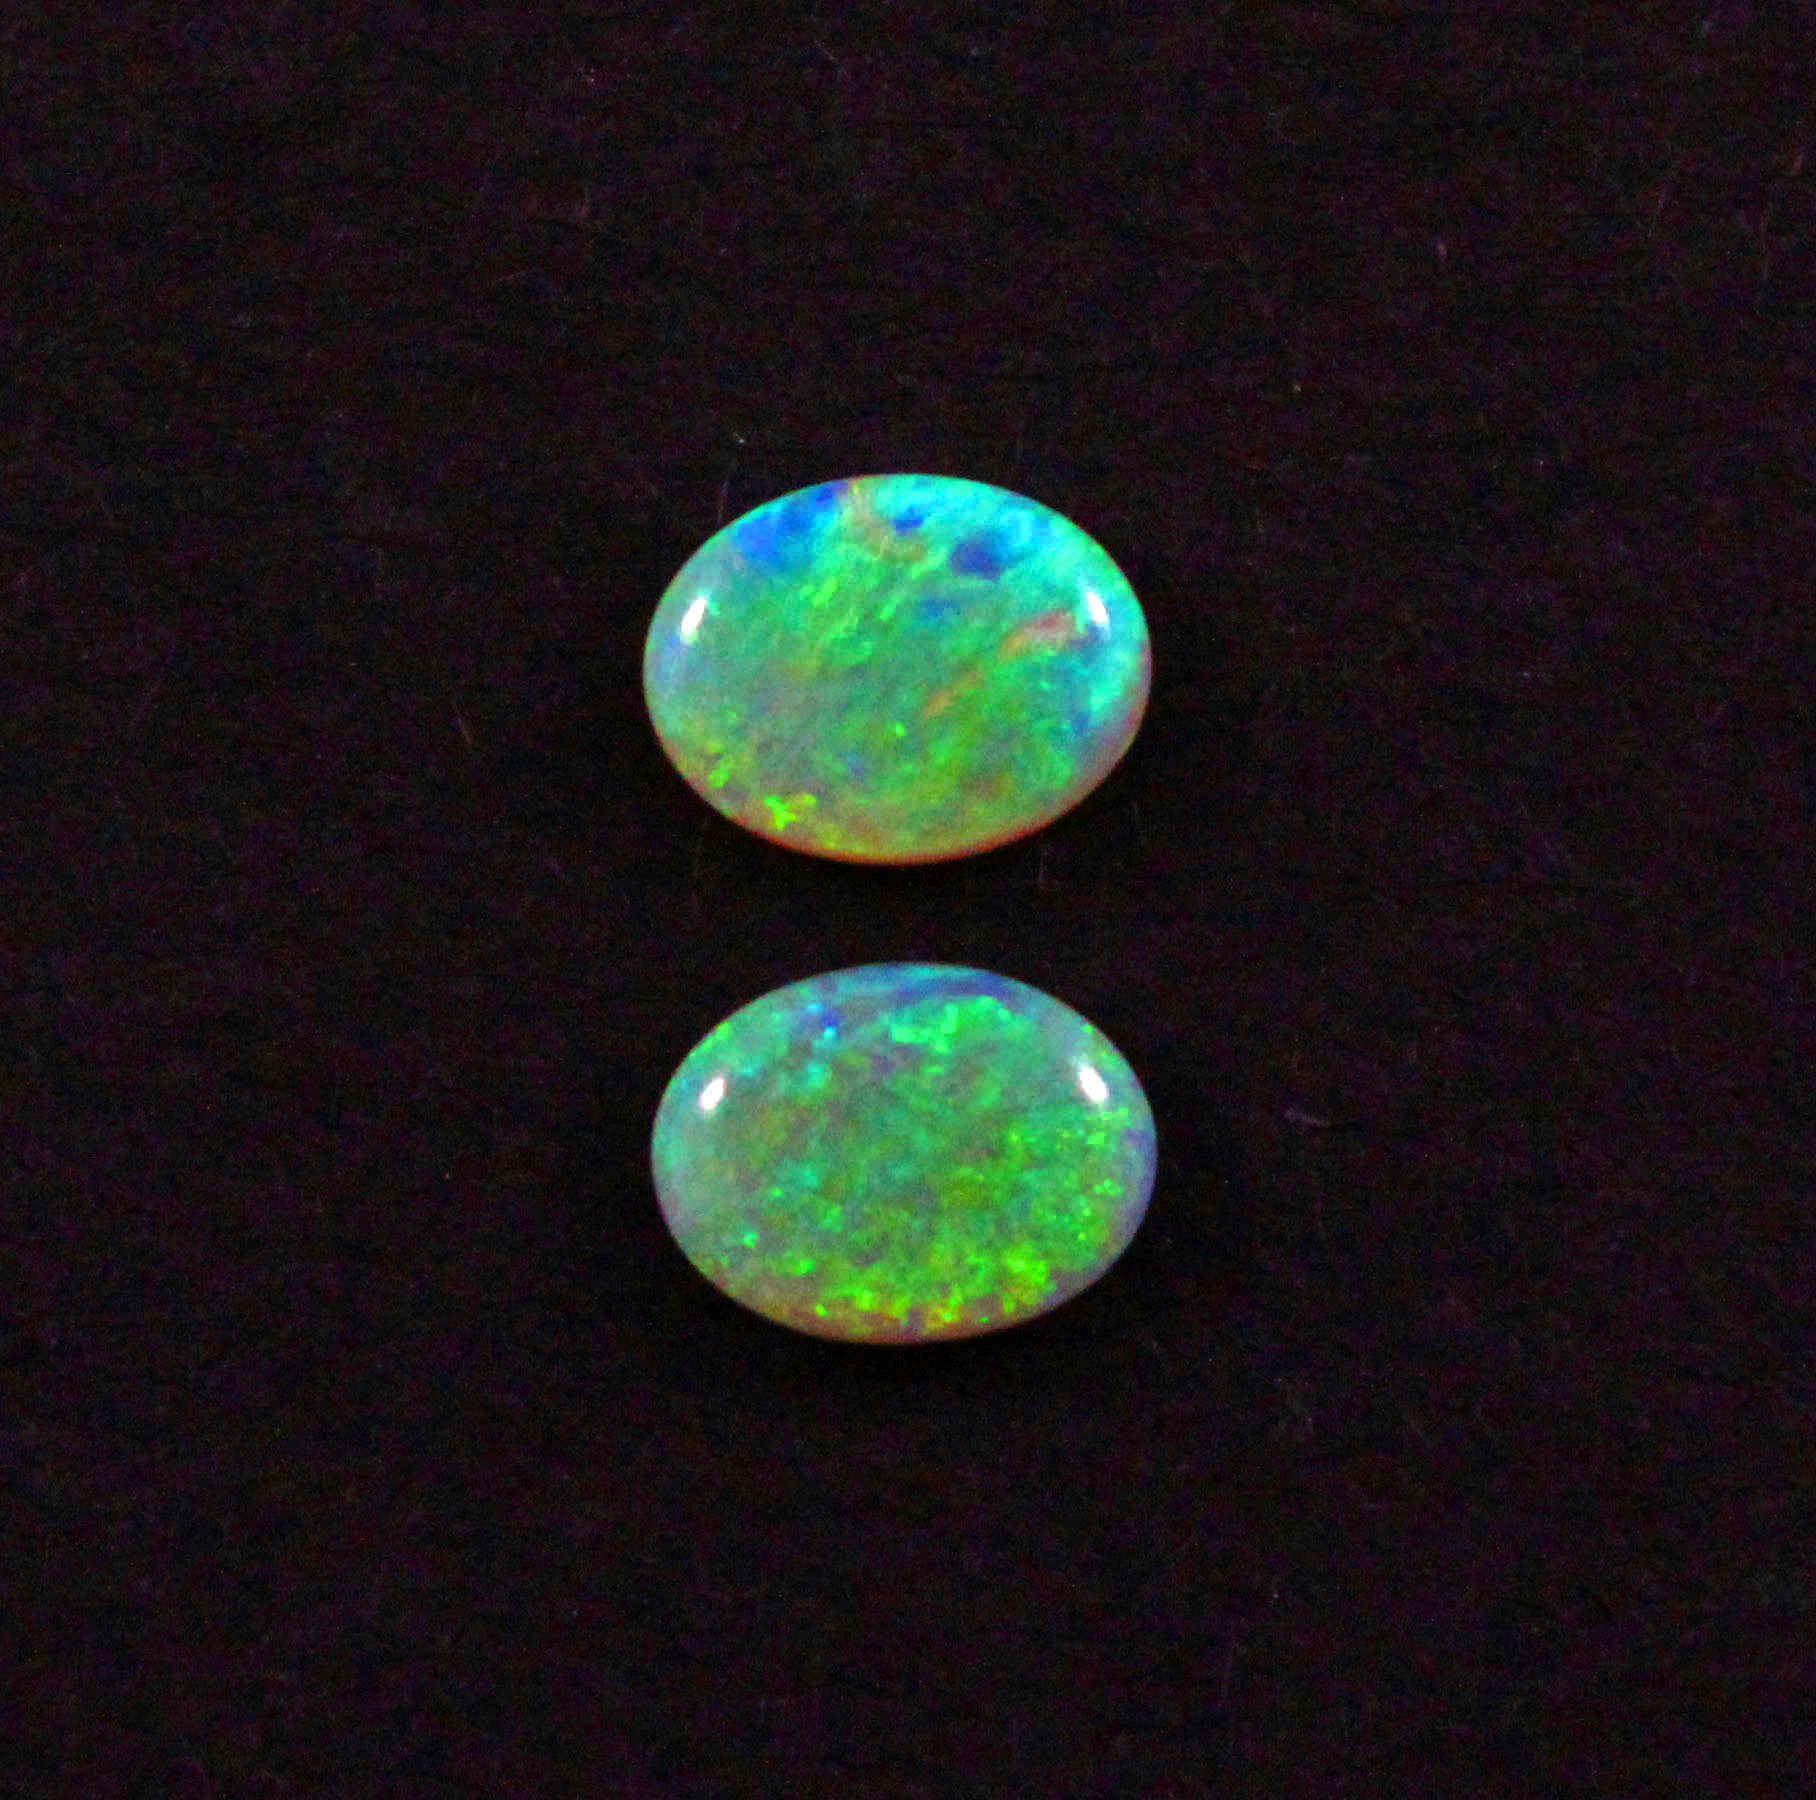 Australian black opal matched pair 2.48 carat total loose gemstone - Purchase only with custom order - Sarah Hughes - 7